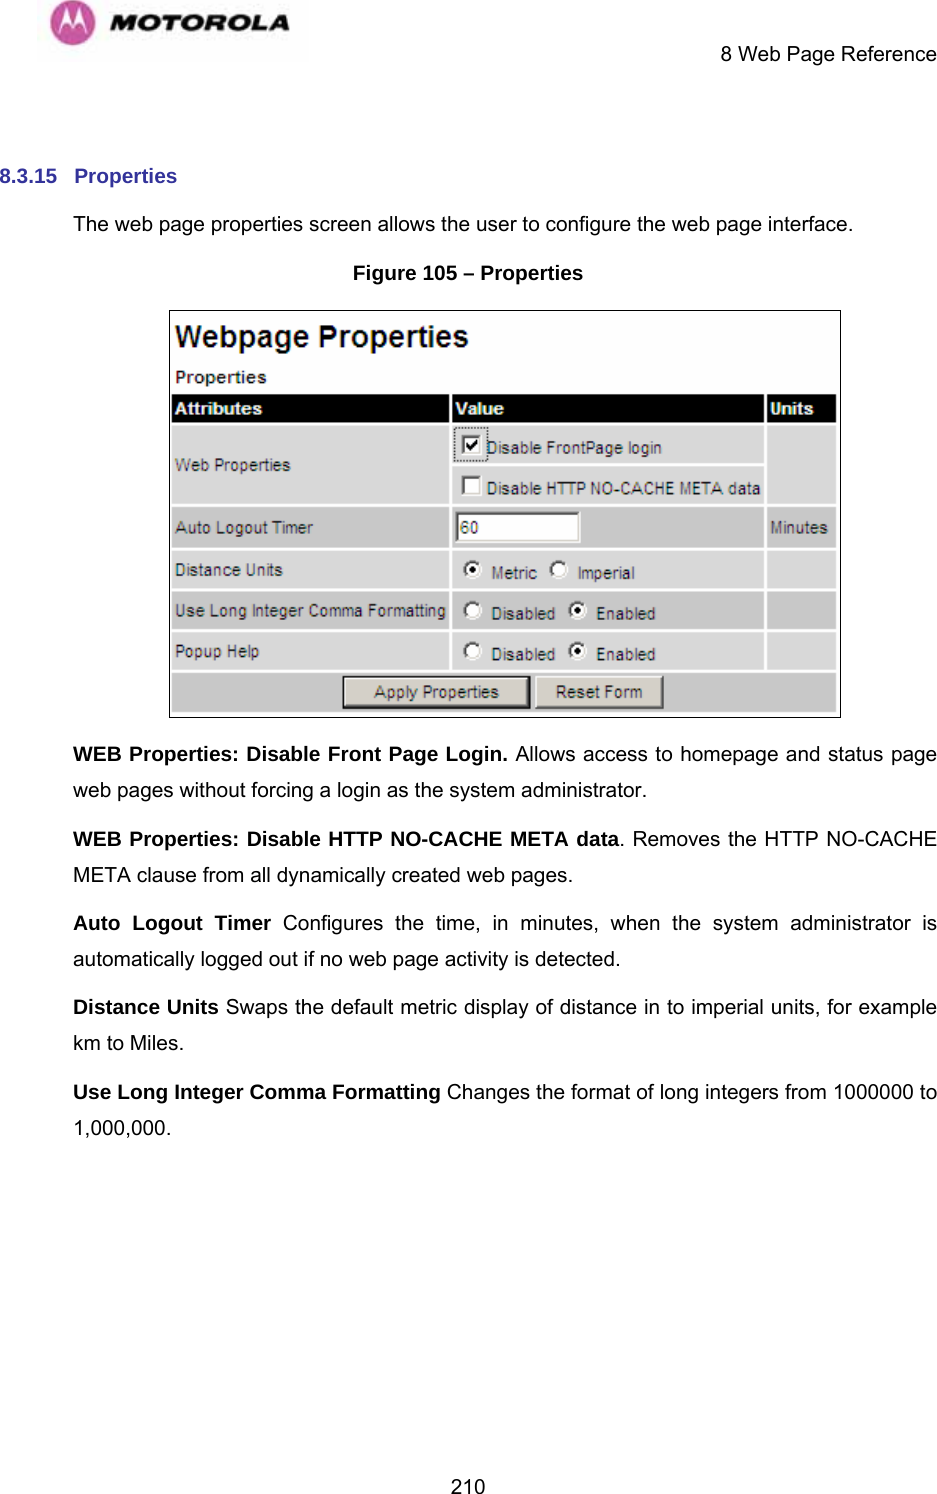     8 Web Page Reference  210 8.3.15  Properties The web page properties screen allows the user to configure the web page interface. Figure 105 – Properties  WEB Properties: Disable Front Page Login. Allows access to homepage and status page web pages without forcing a login as the system administrator. WEB Properties: Disable HTTP NO-CACHE META data. Removes the HTTP NO-CACHE META clause from all dynamically created web pages. Auto Logout Timer Configures the time, in minutes, when the system administrator is automatically logged out if no web page activity is detected. Distance Units Swaps the default metric display of distance in to imperial units, for example km to Miles. Use Long Integer Comma Formatting Changes the format of long integers from 1000000 to 1,000,000.  